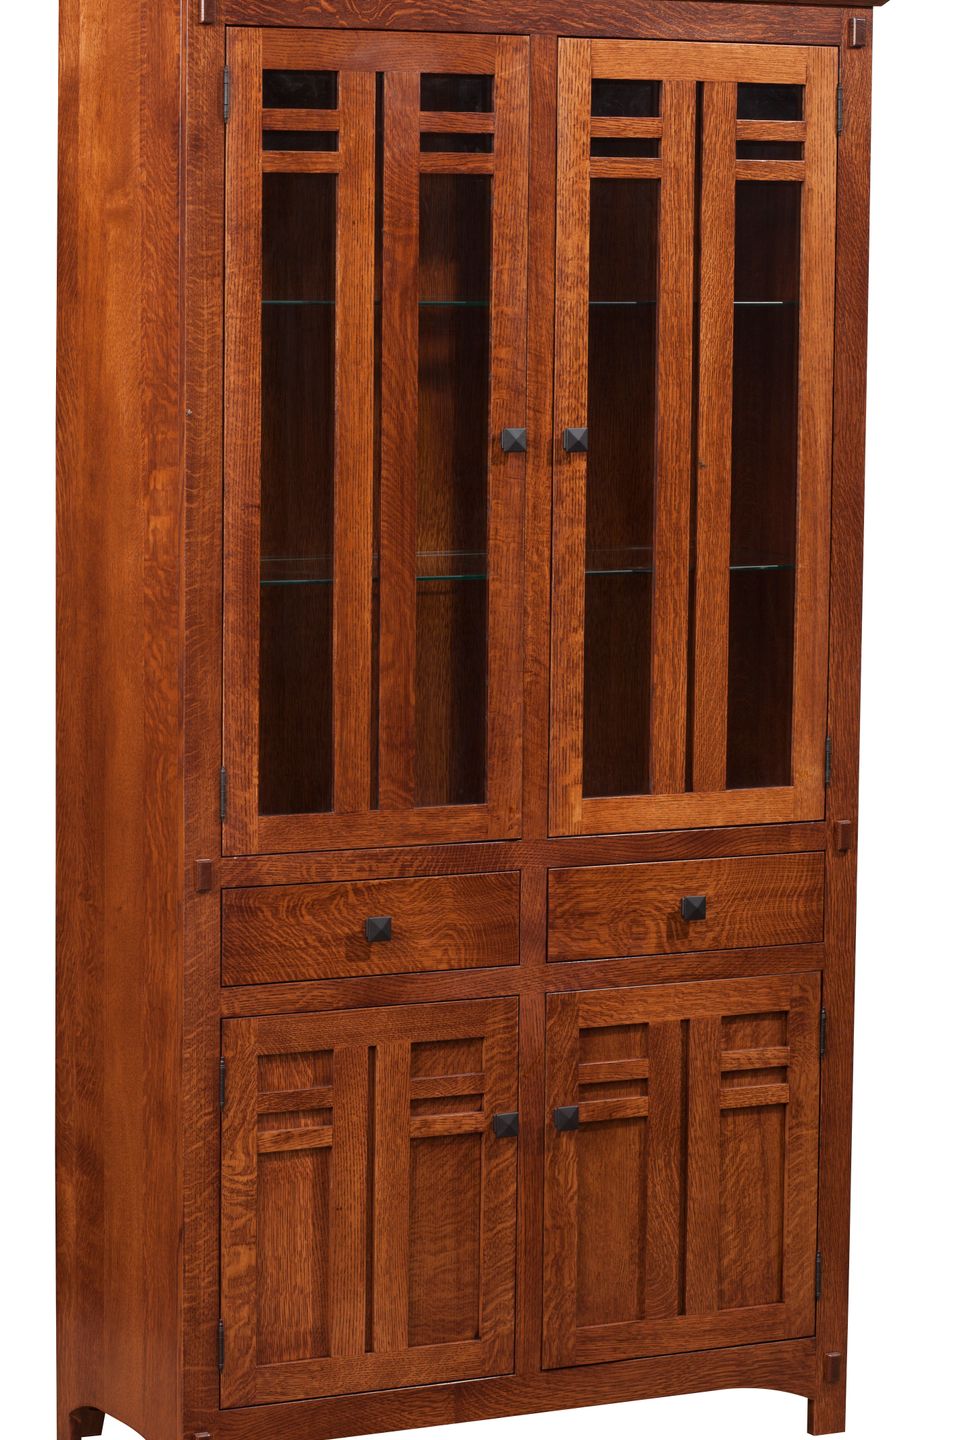 Plw bungalow dining cabinet